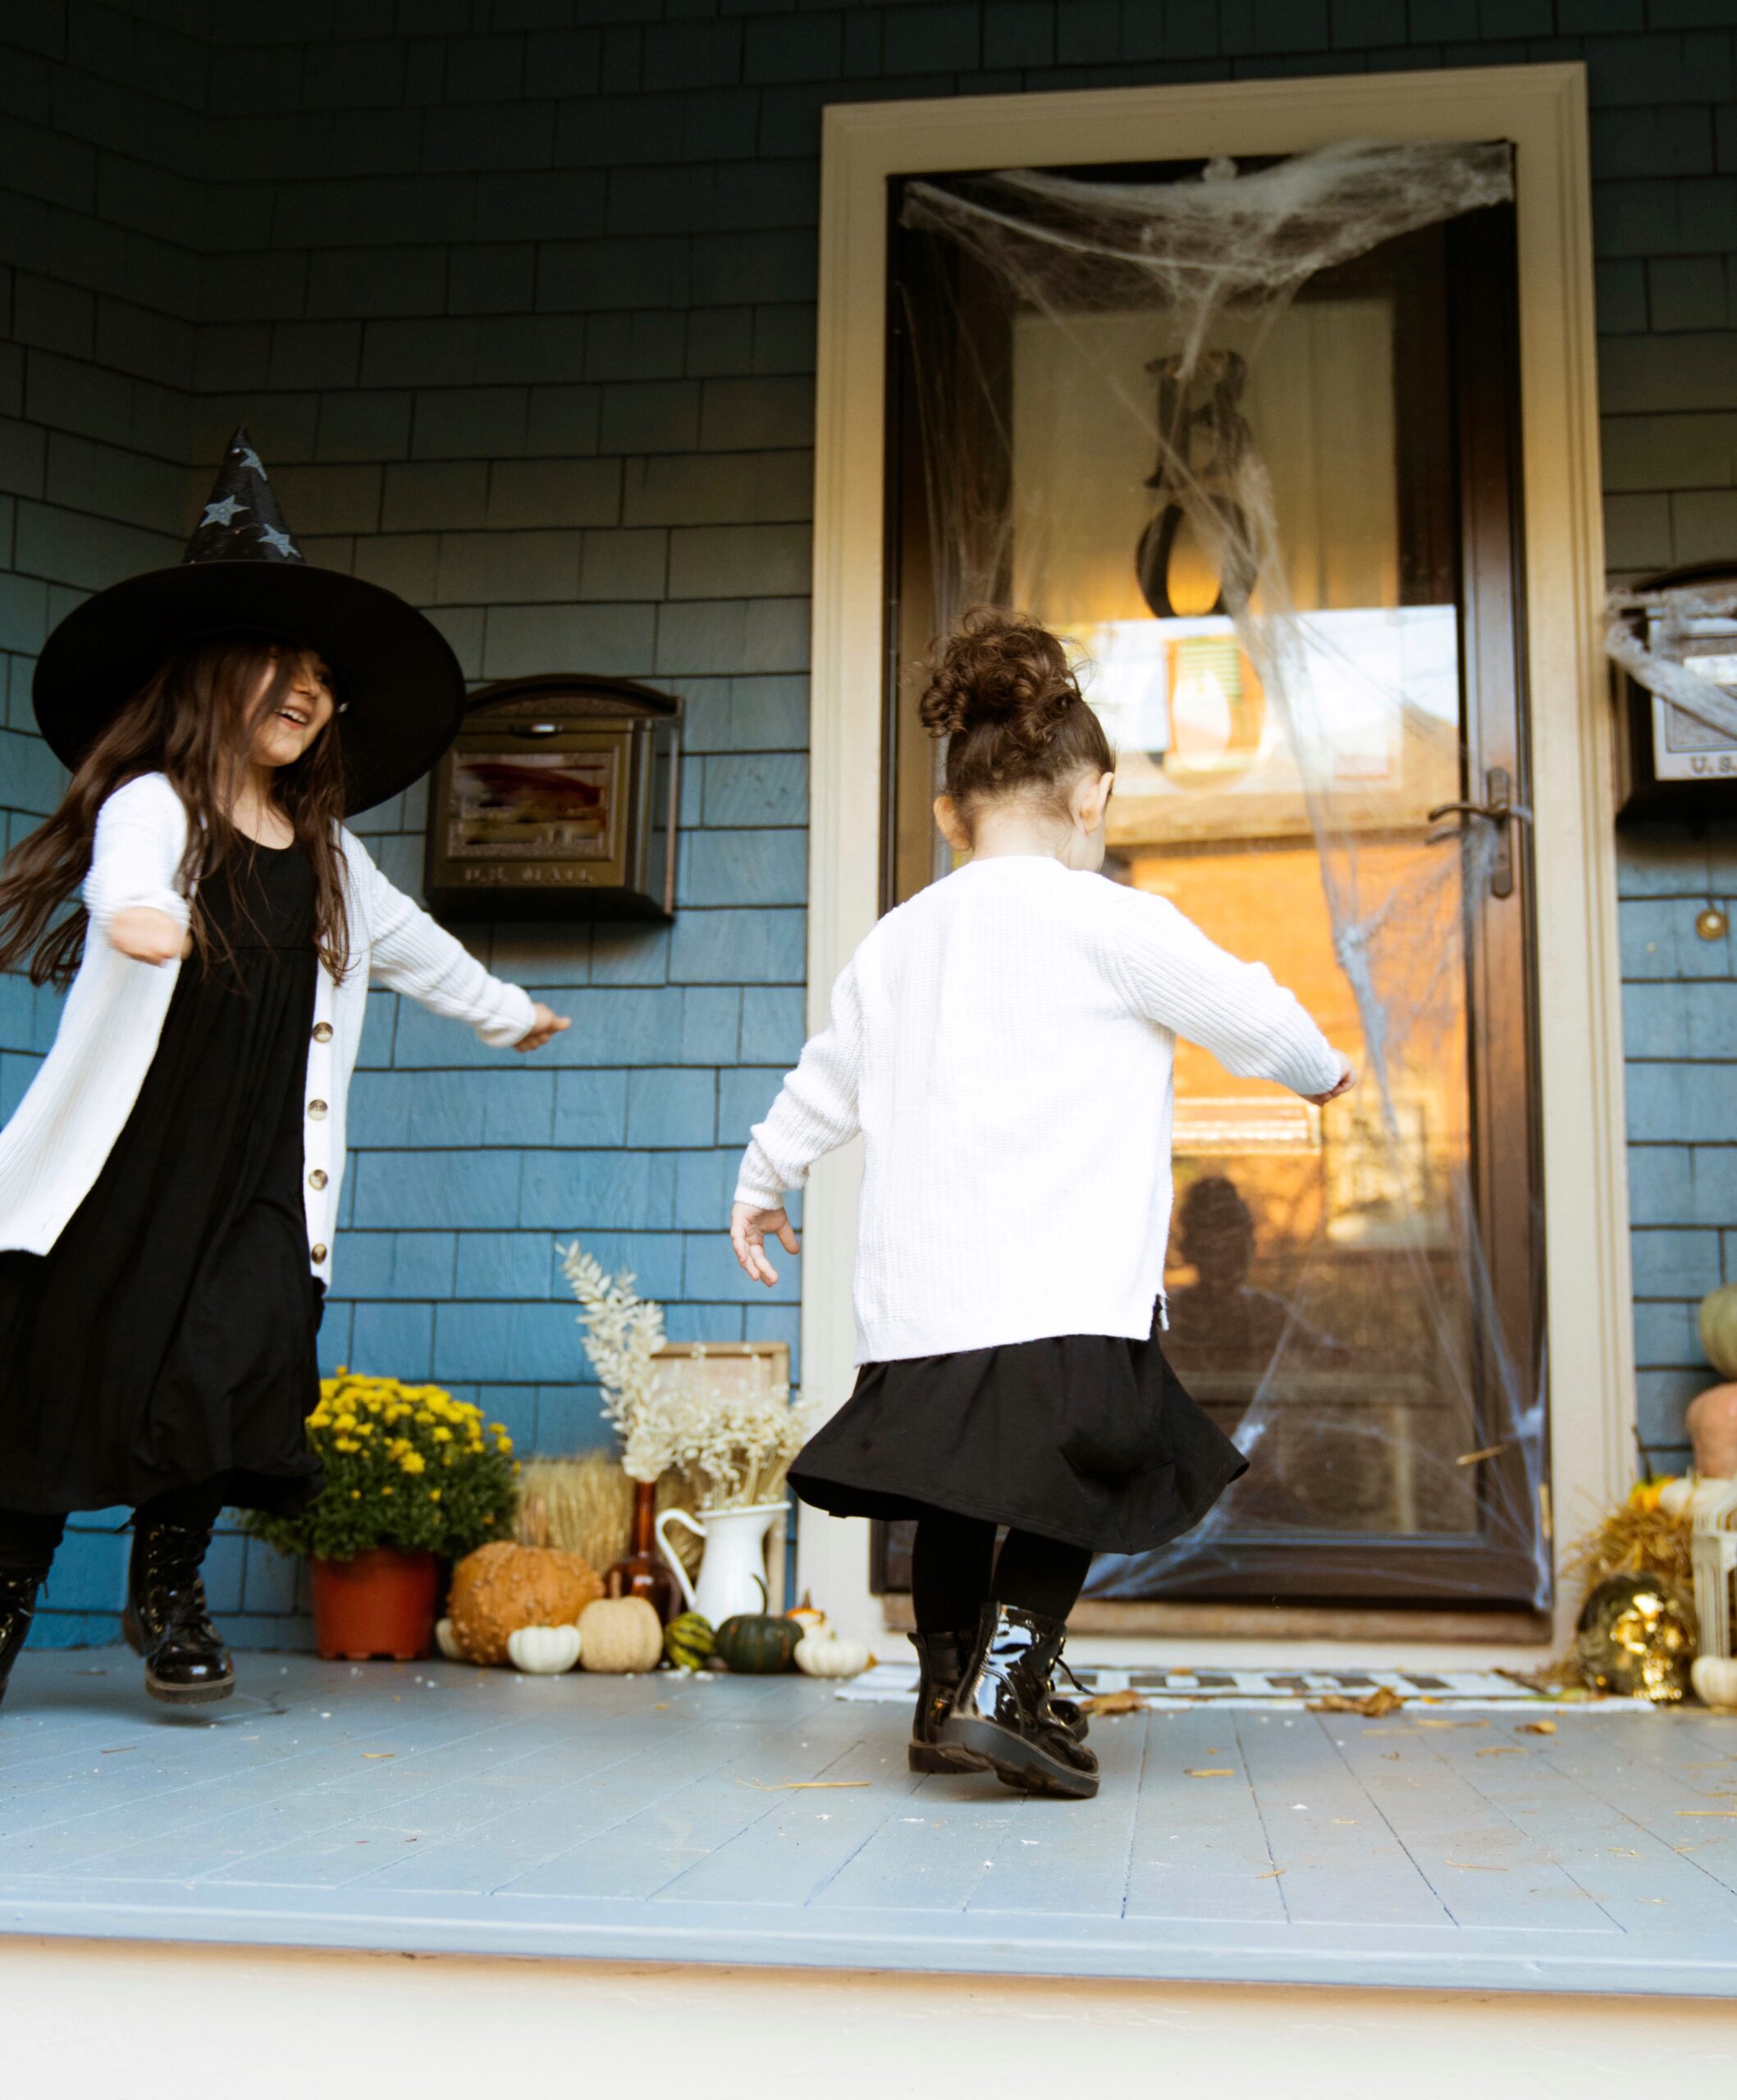 It’s time to decorate your front porch for fall! I’m sharing easy tips and tricks for styling a Halloween porch that can easily transition to a fall porch just in time for Thanksgiving! | @glitterinclexi | GLITTERINC.COM